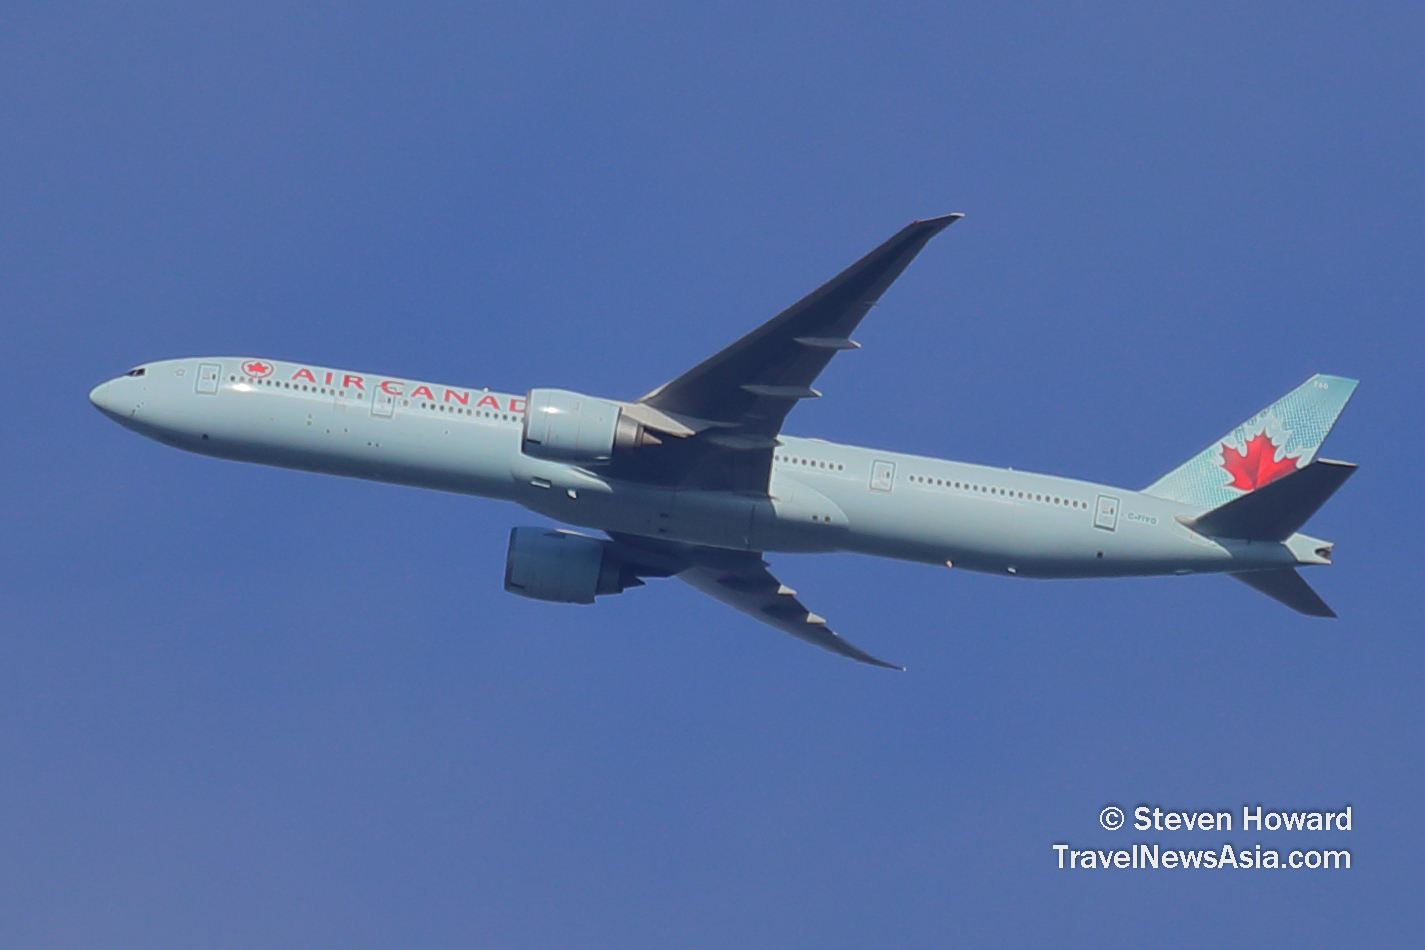 Air Canada B777 reg: C-FIVQ. Picture by Steven Howard of TravelNewsAsia.com Click to enlarge.